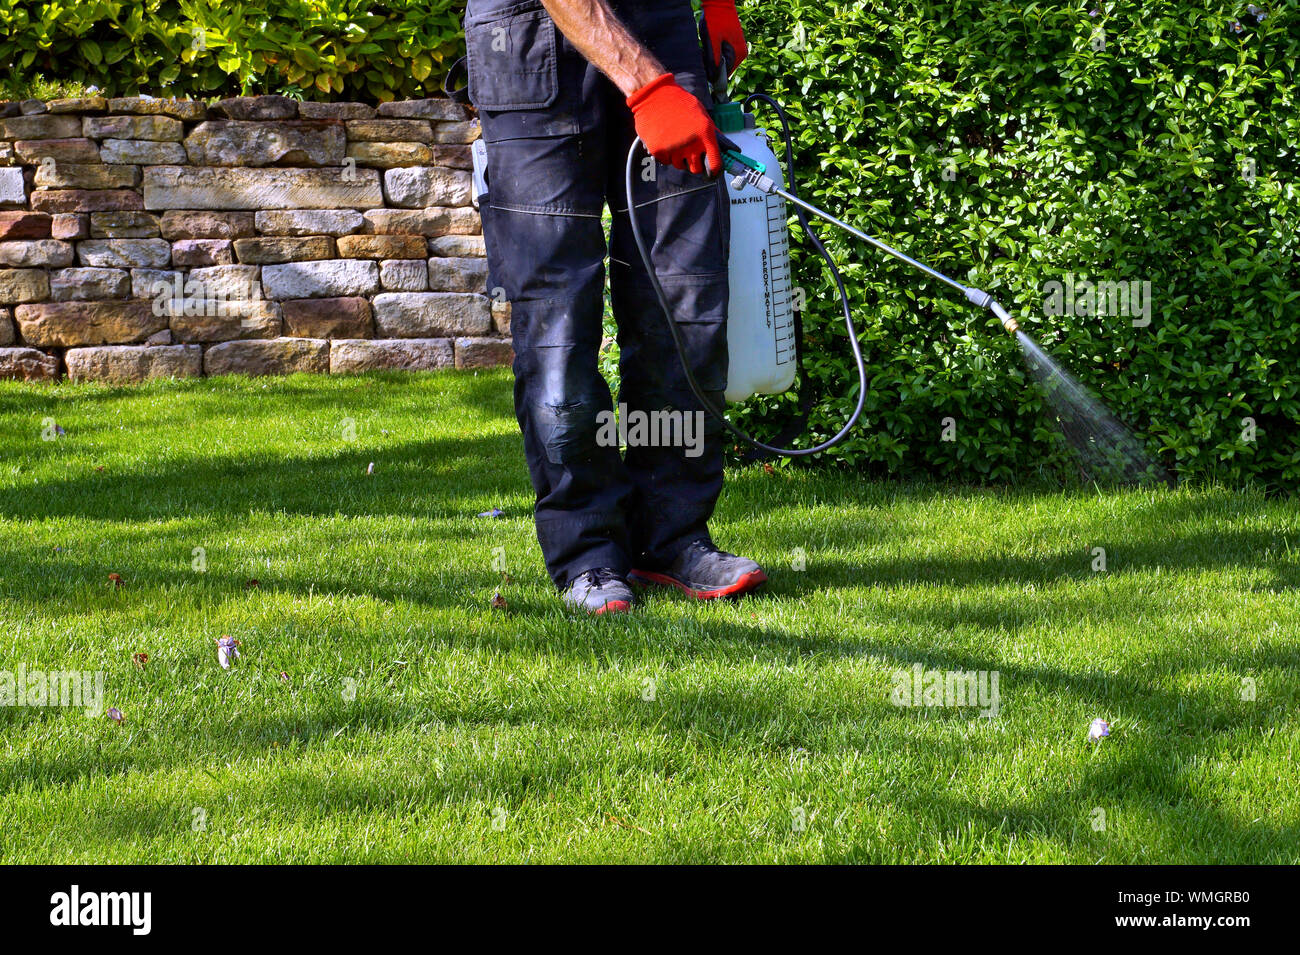 spraying pesticide with portable sprayer to eradicate garden weeds in the lawn. weedicide spray on the weeds in the garden. Weed control concept. Stock Photo